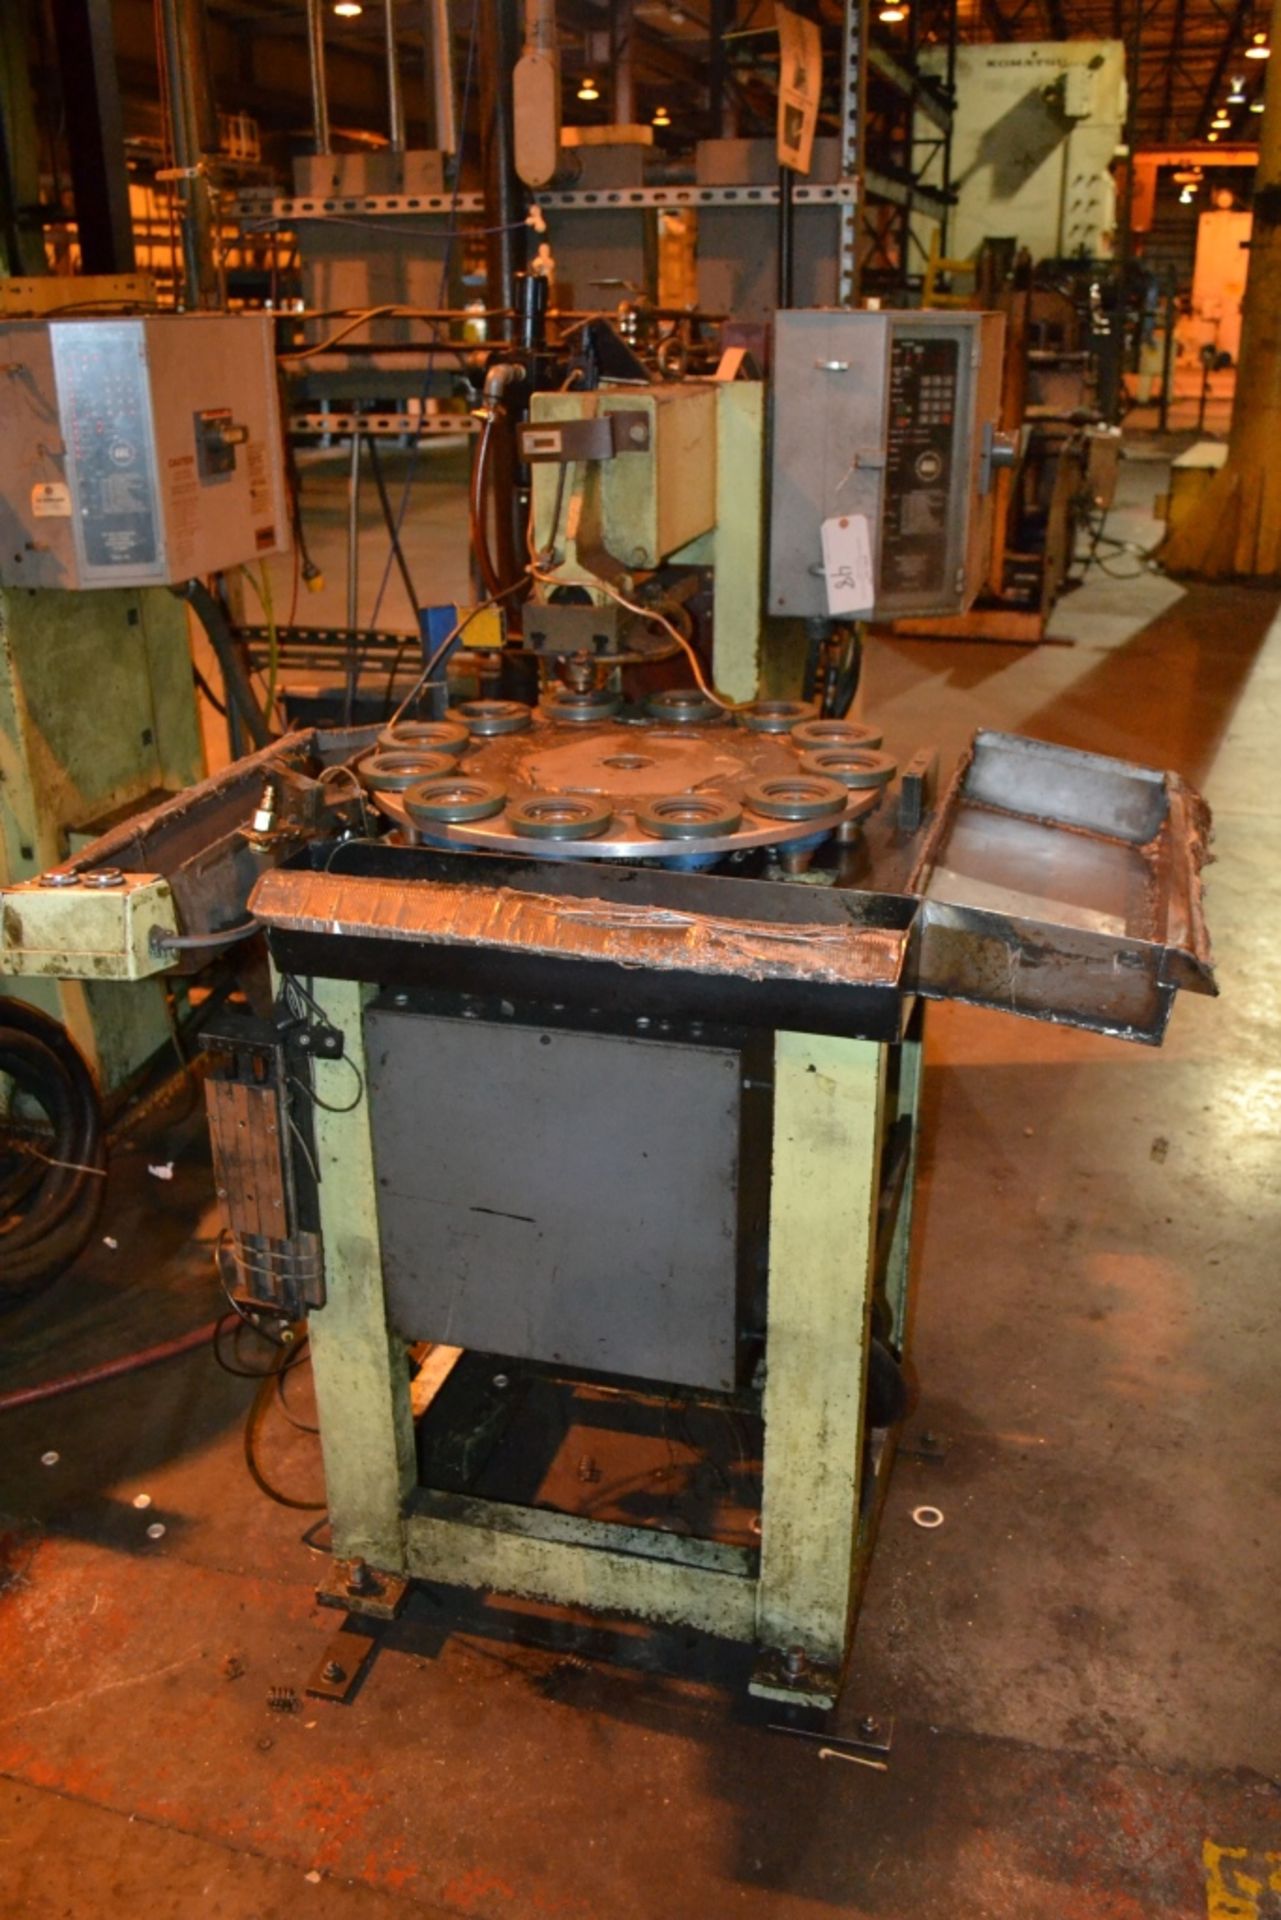 Lot Consisting of: (2) 75-KVA Spot Welders, with Intertron Solid State Controls, and 12-Position - Image 2 of 3